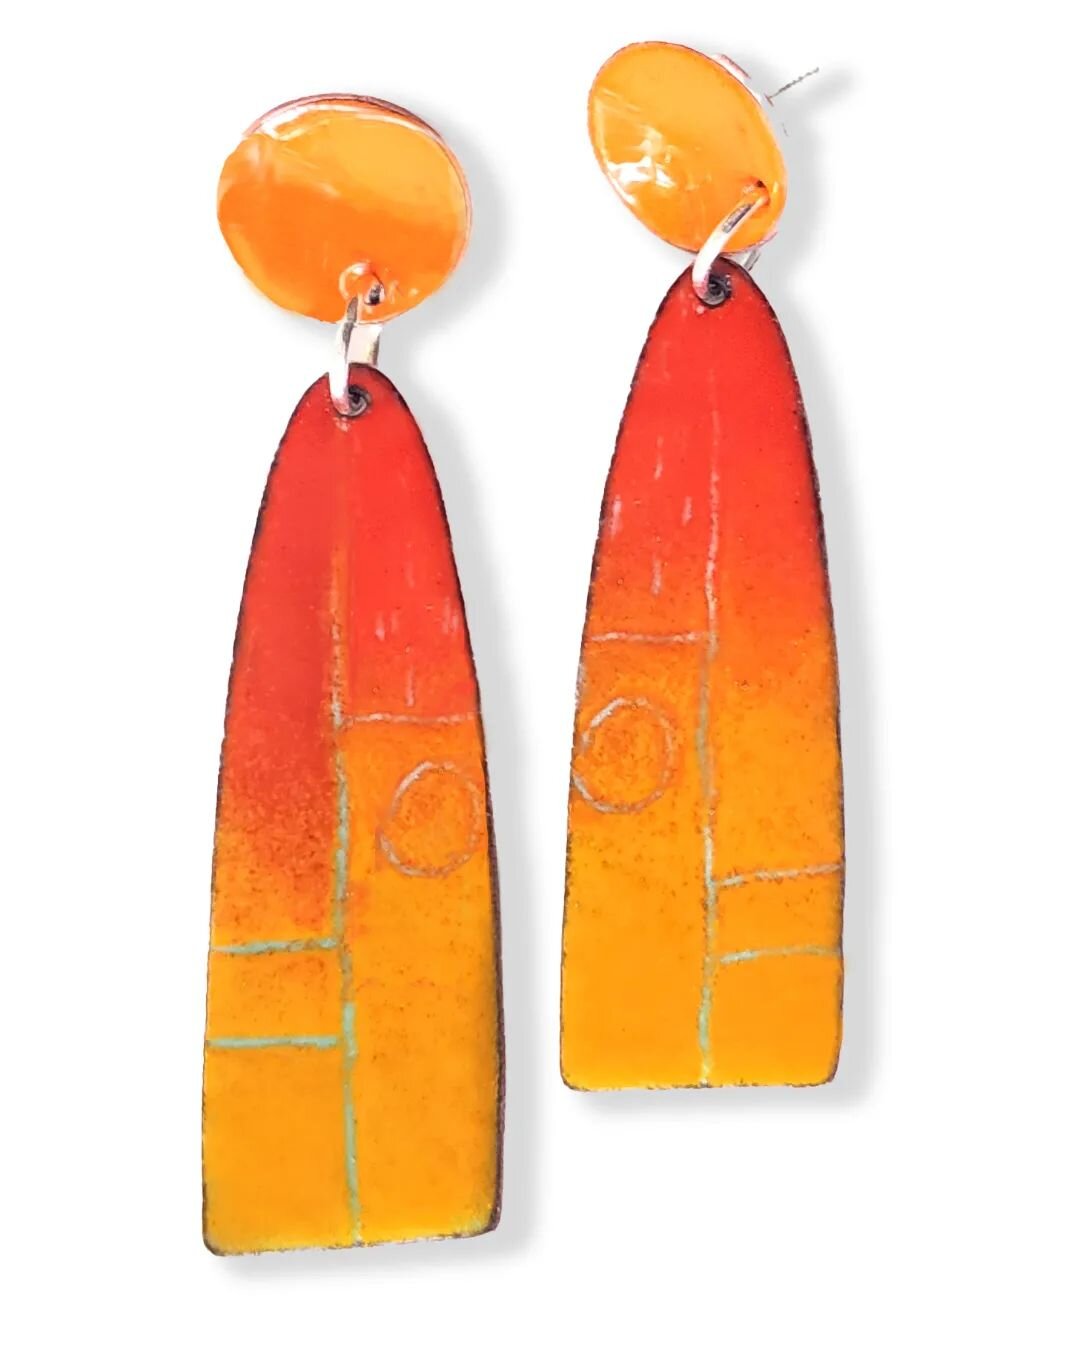 In love with orange!! Coming out with some new summer colors. 
.
I am acutely aware I have been absent from Instagram/FB over the last month. Lots going on with getting @mainegalleryguide off to press, work on the house, my mom's illness (she's doing